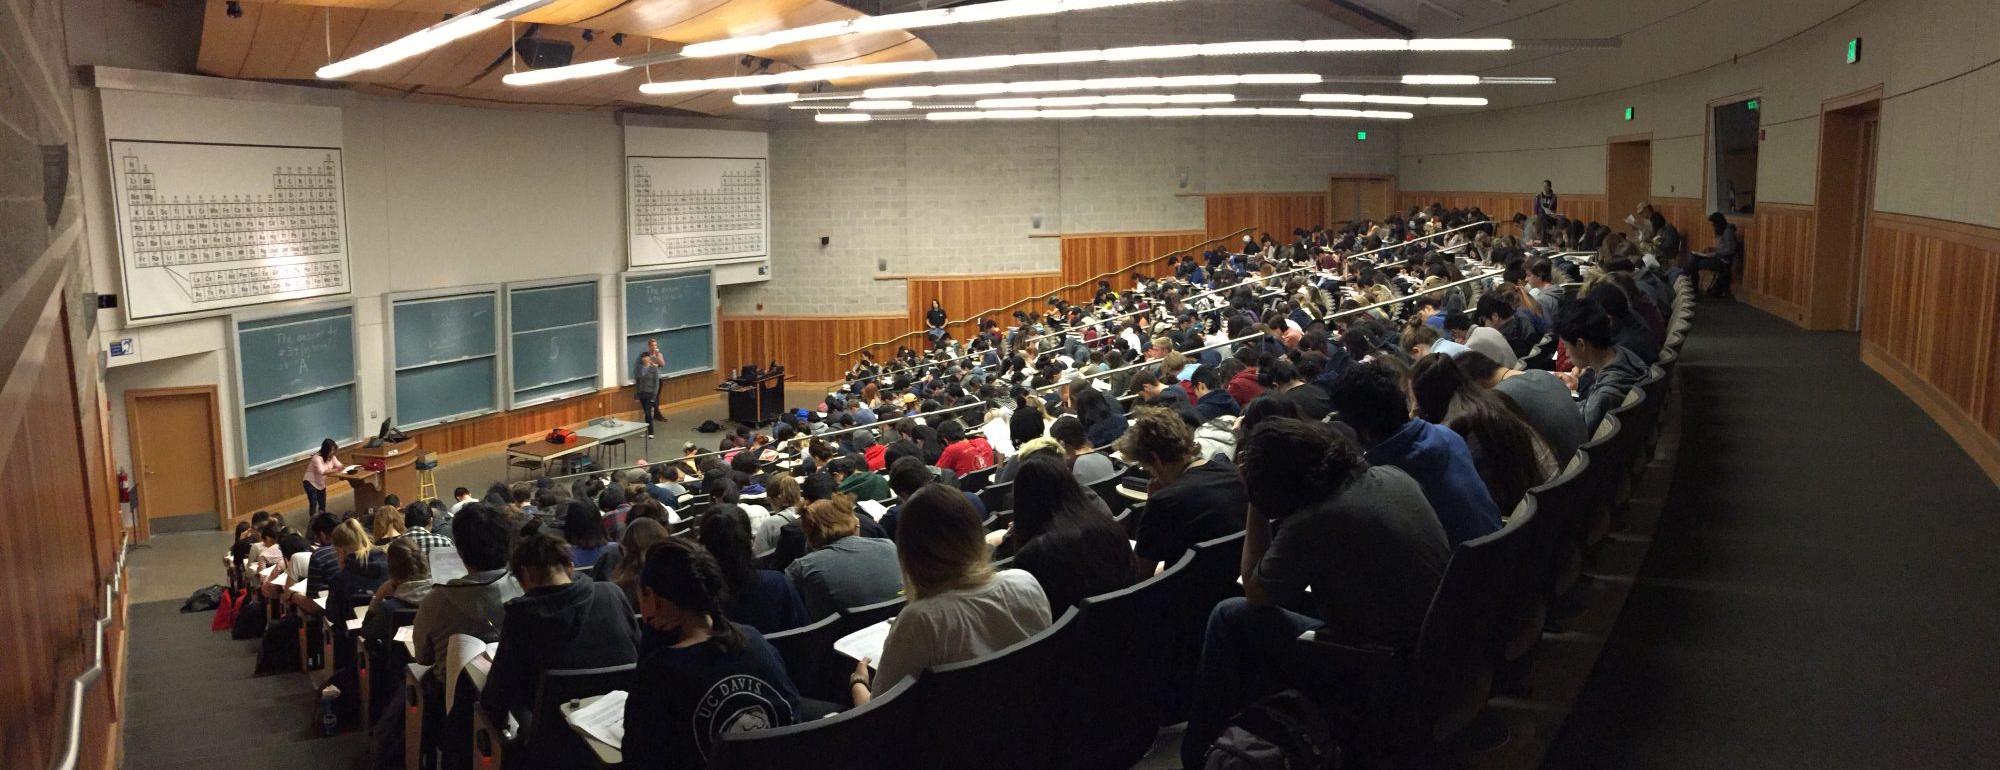 A lecture in the UC Davis Science Lecture Hall